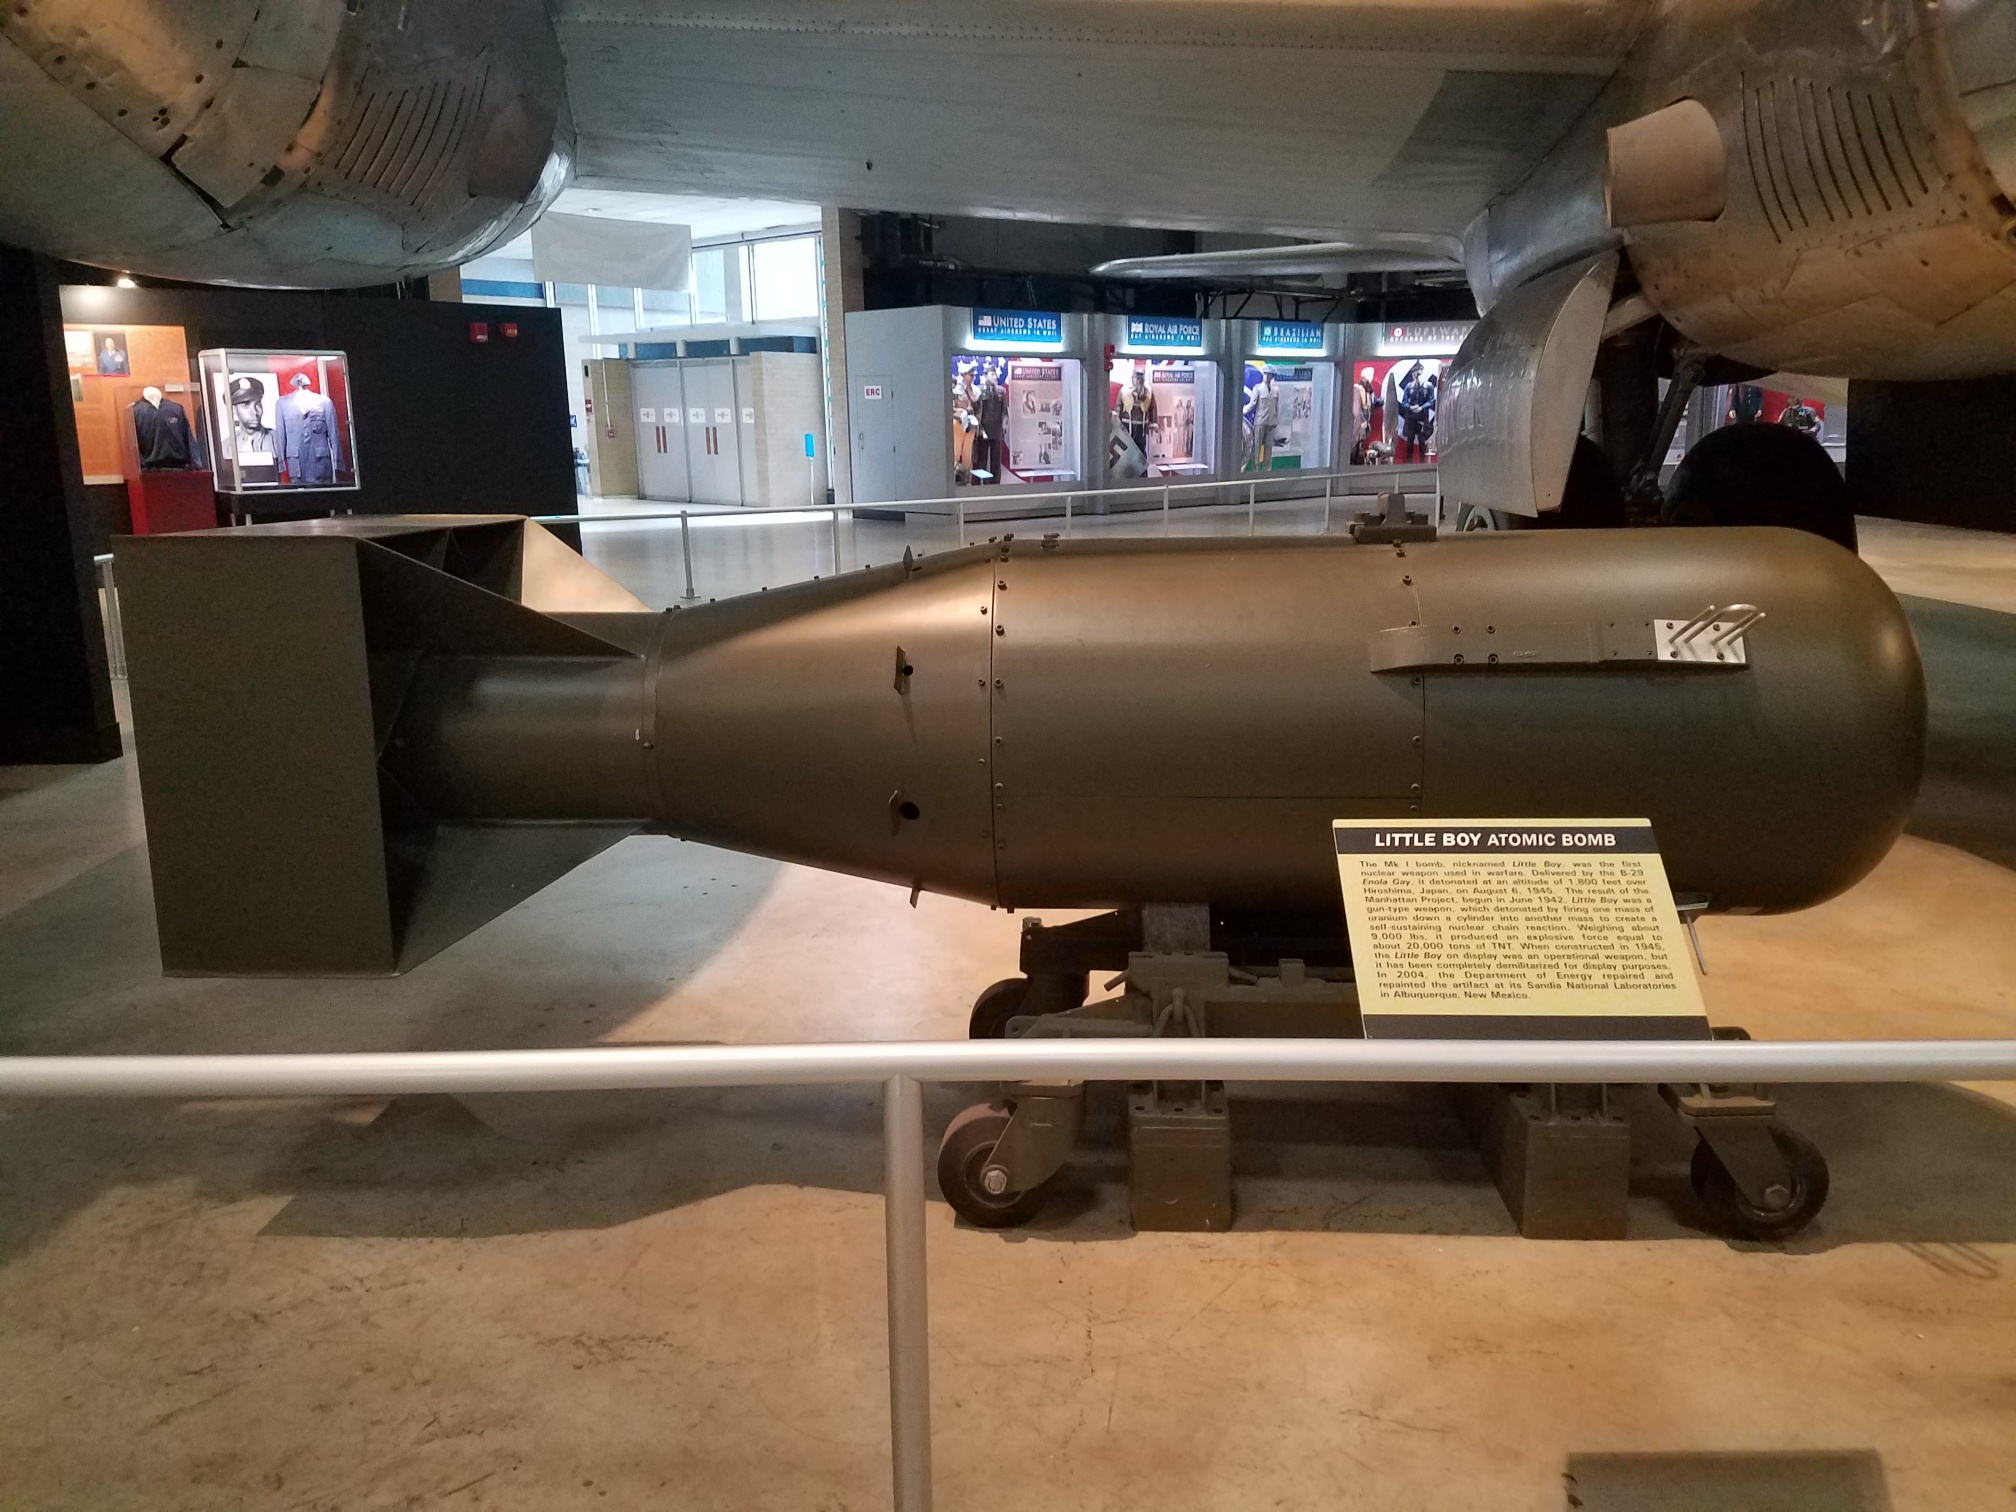 A replica of the atomic bomb Little Boy that was dropped on Hiroshima, Japan. This was the first nuclear weapon ever used in war.